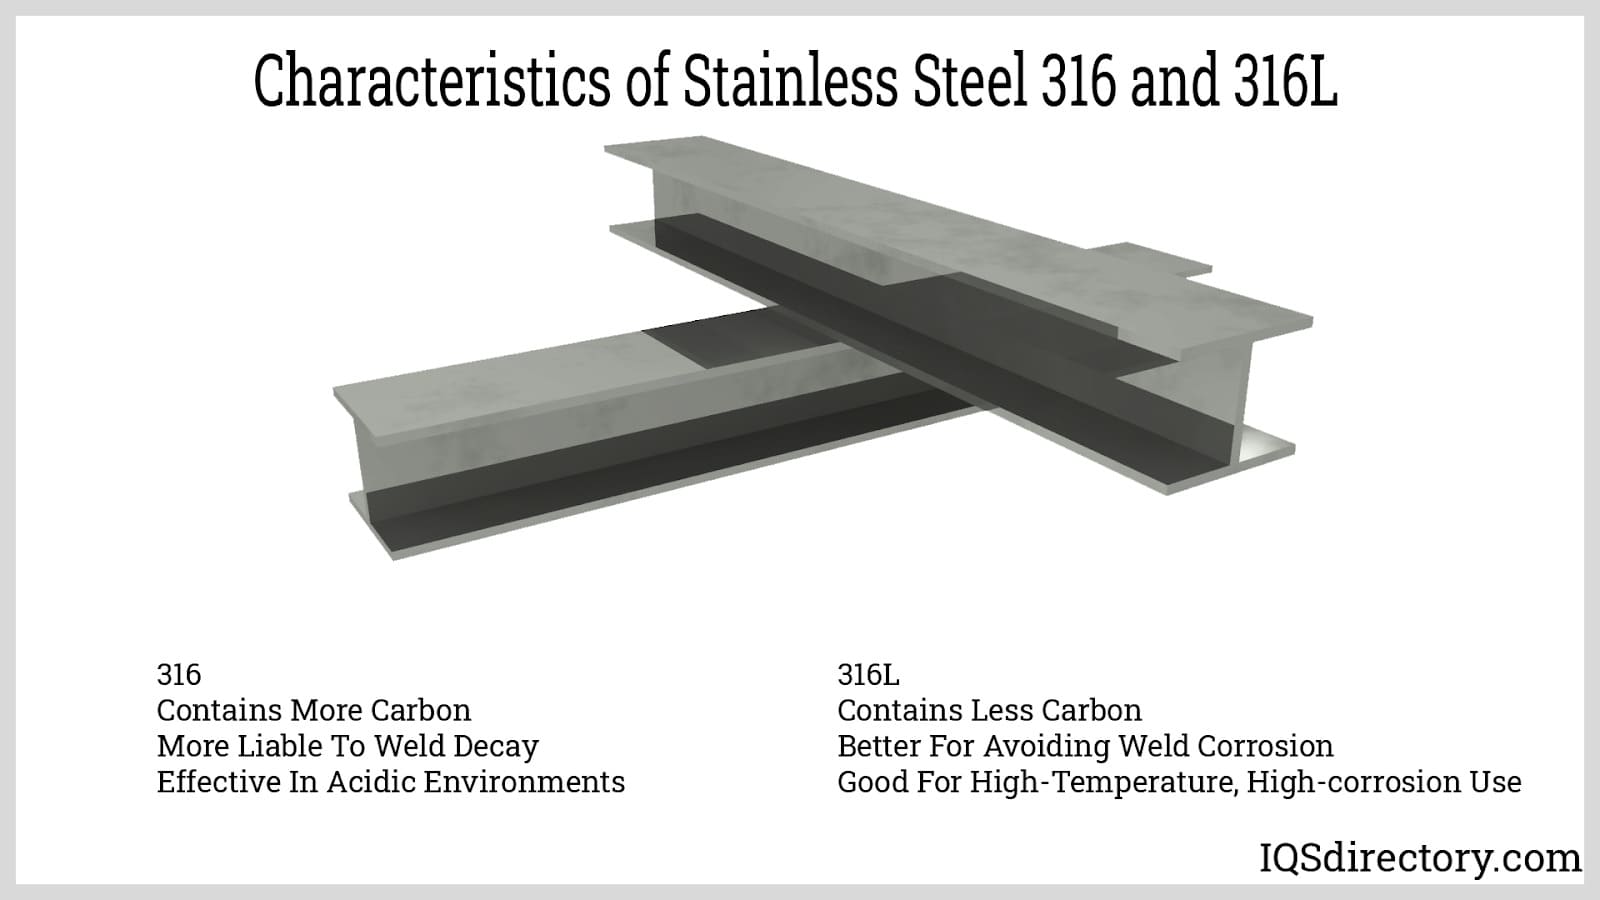 Characteristics of Stainless Steel 316 and 316L